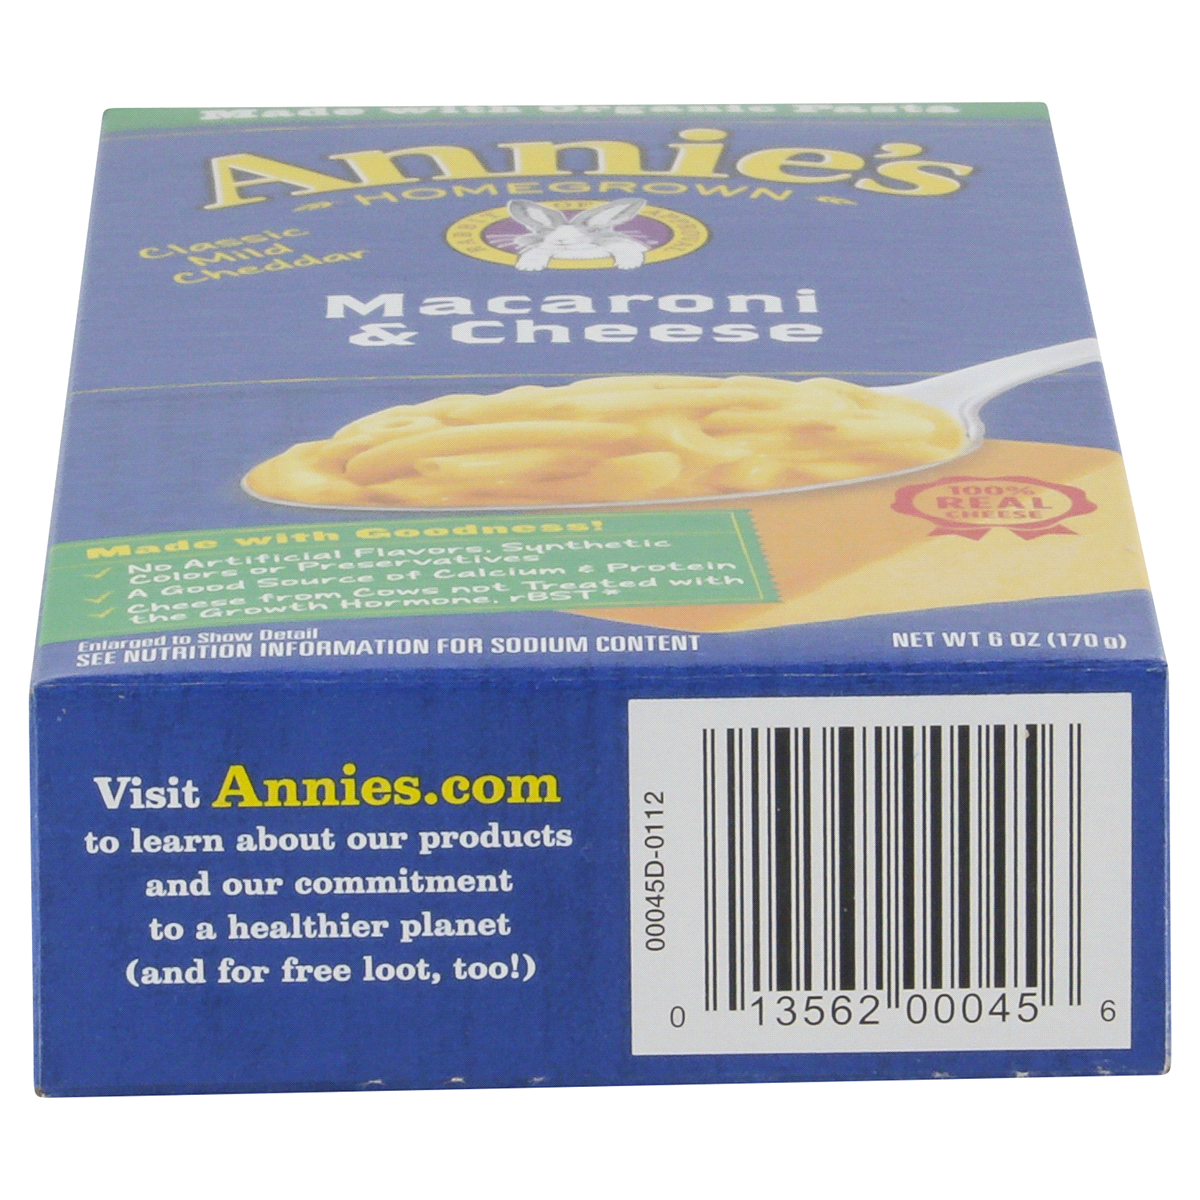 slide 100 of 108, Annie's Annie''s Classic Cheddar Macaroni and Cheese Dinner with Organic Pasta, 6 OZ, 6 oz